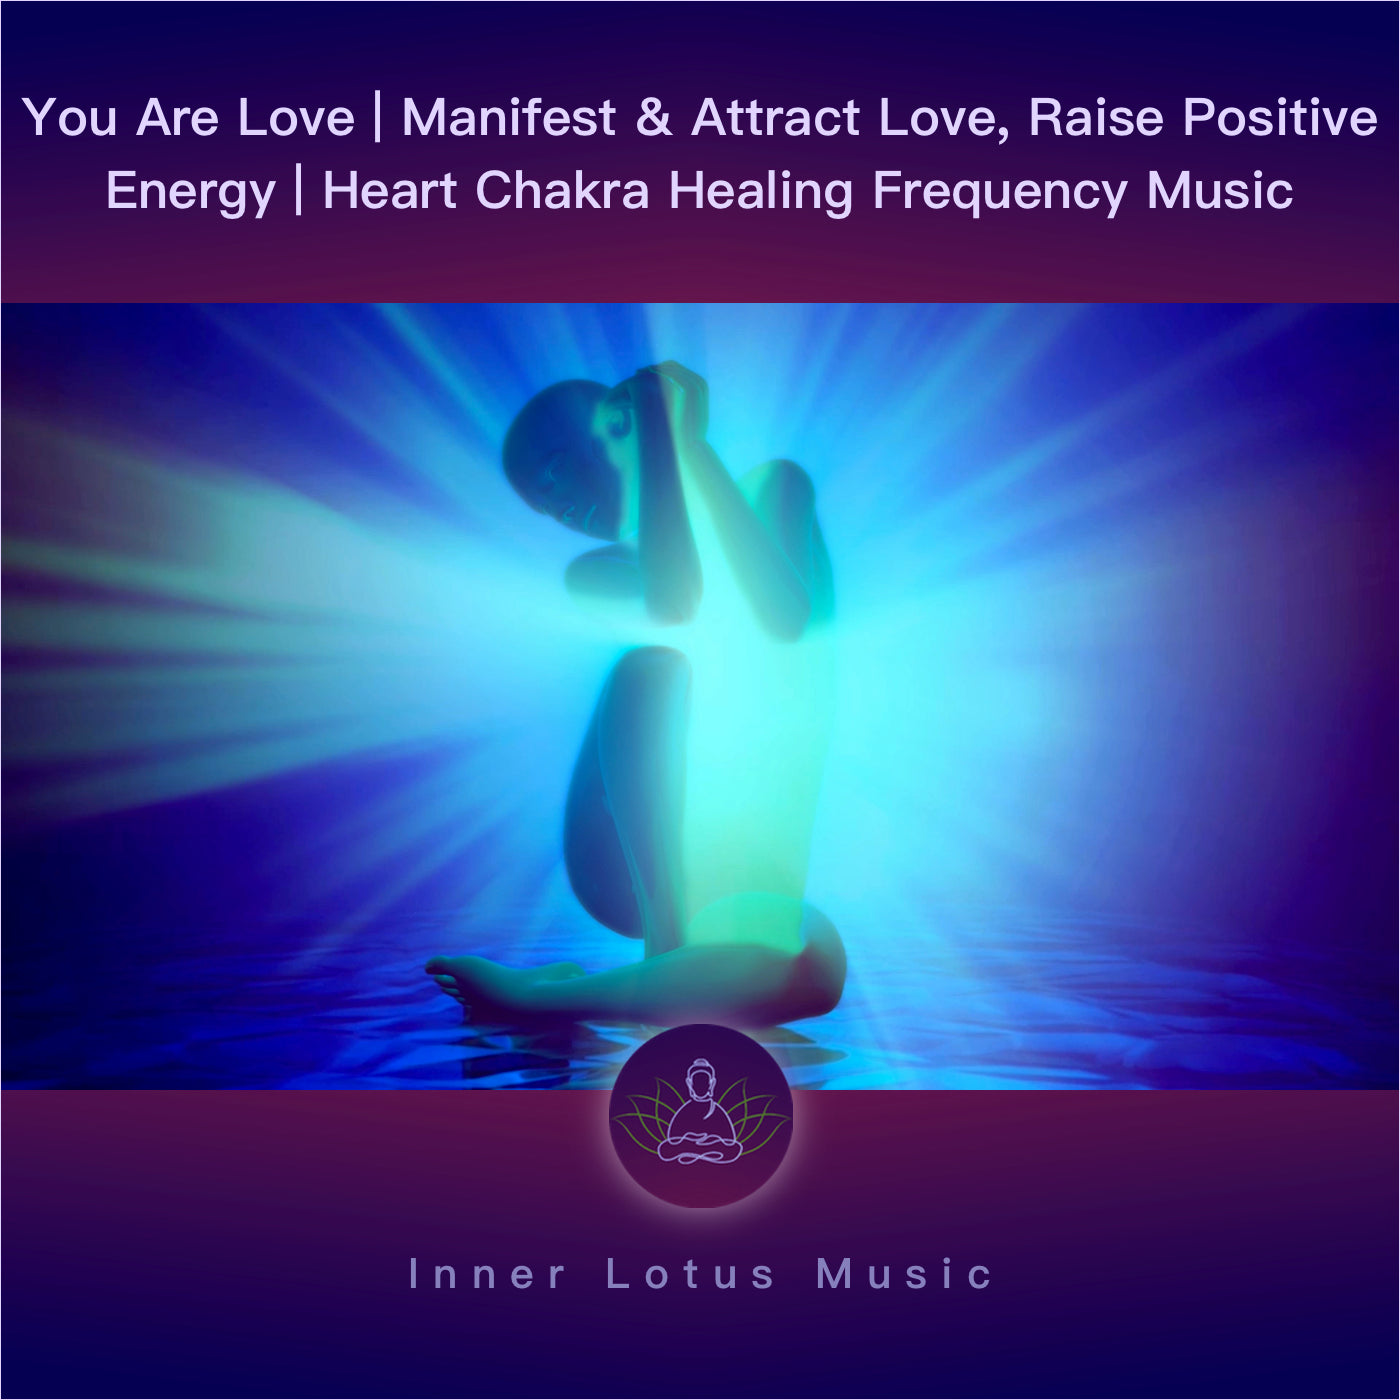 You Are Love | Manifest & Attract Love, Raise Positive Energy | Heart Chakra Healing Frequency Music